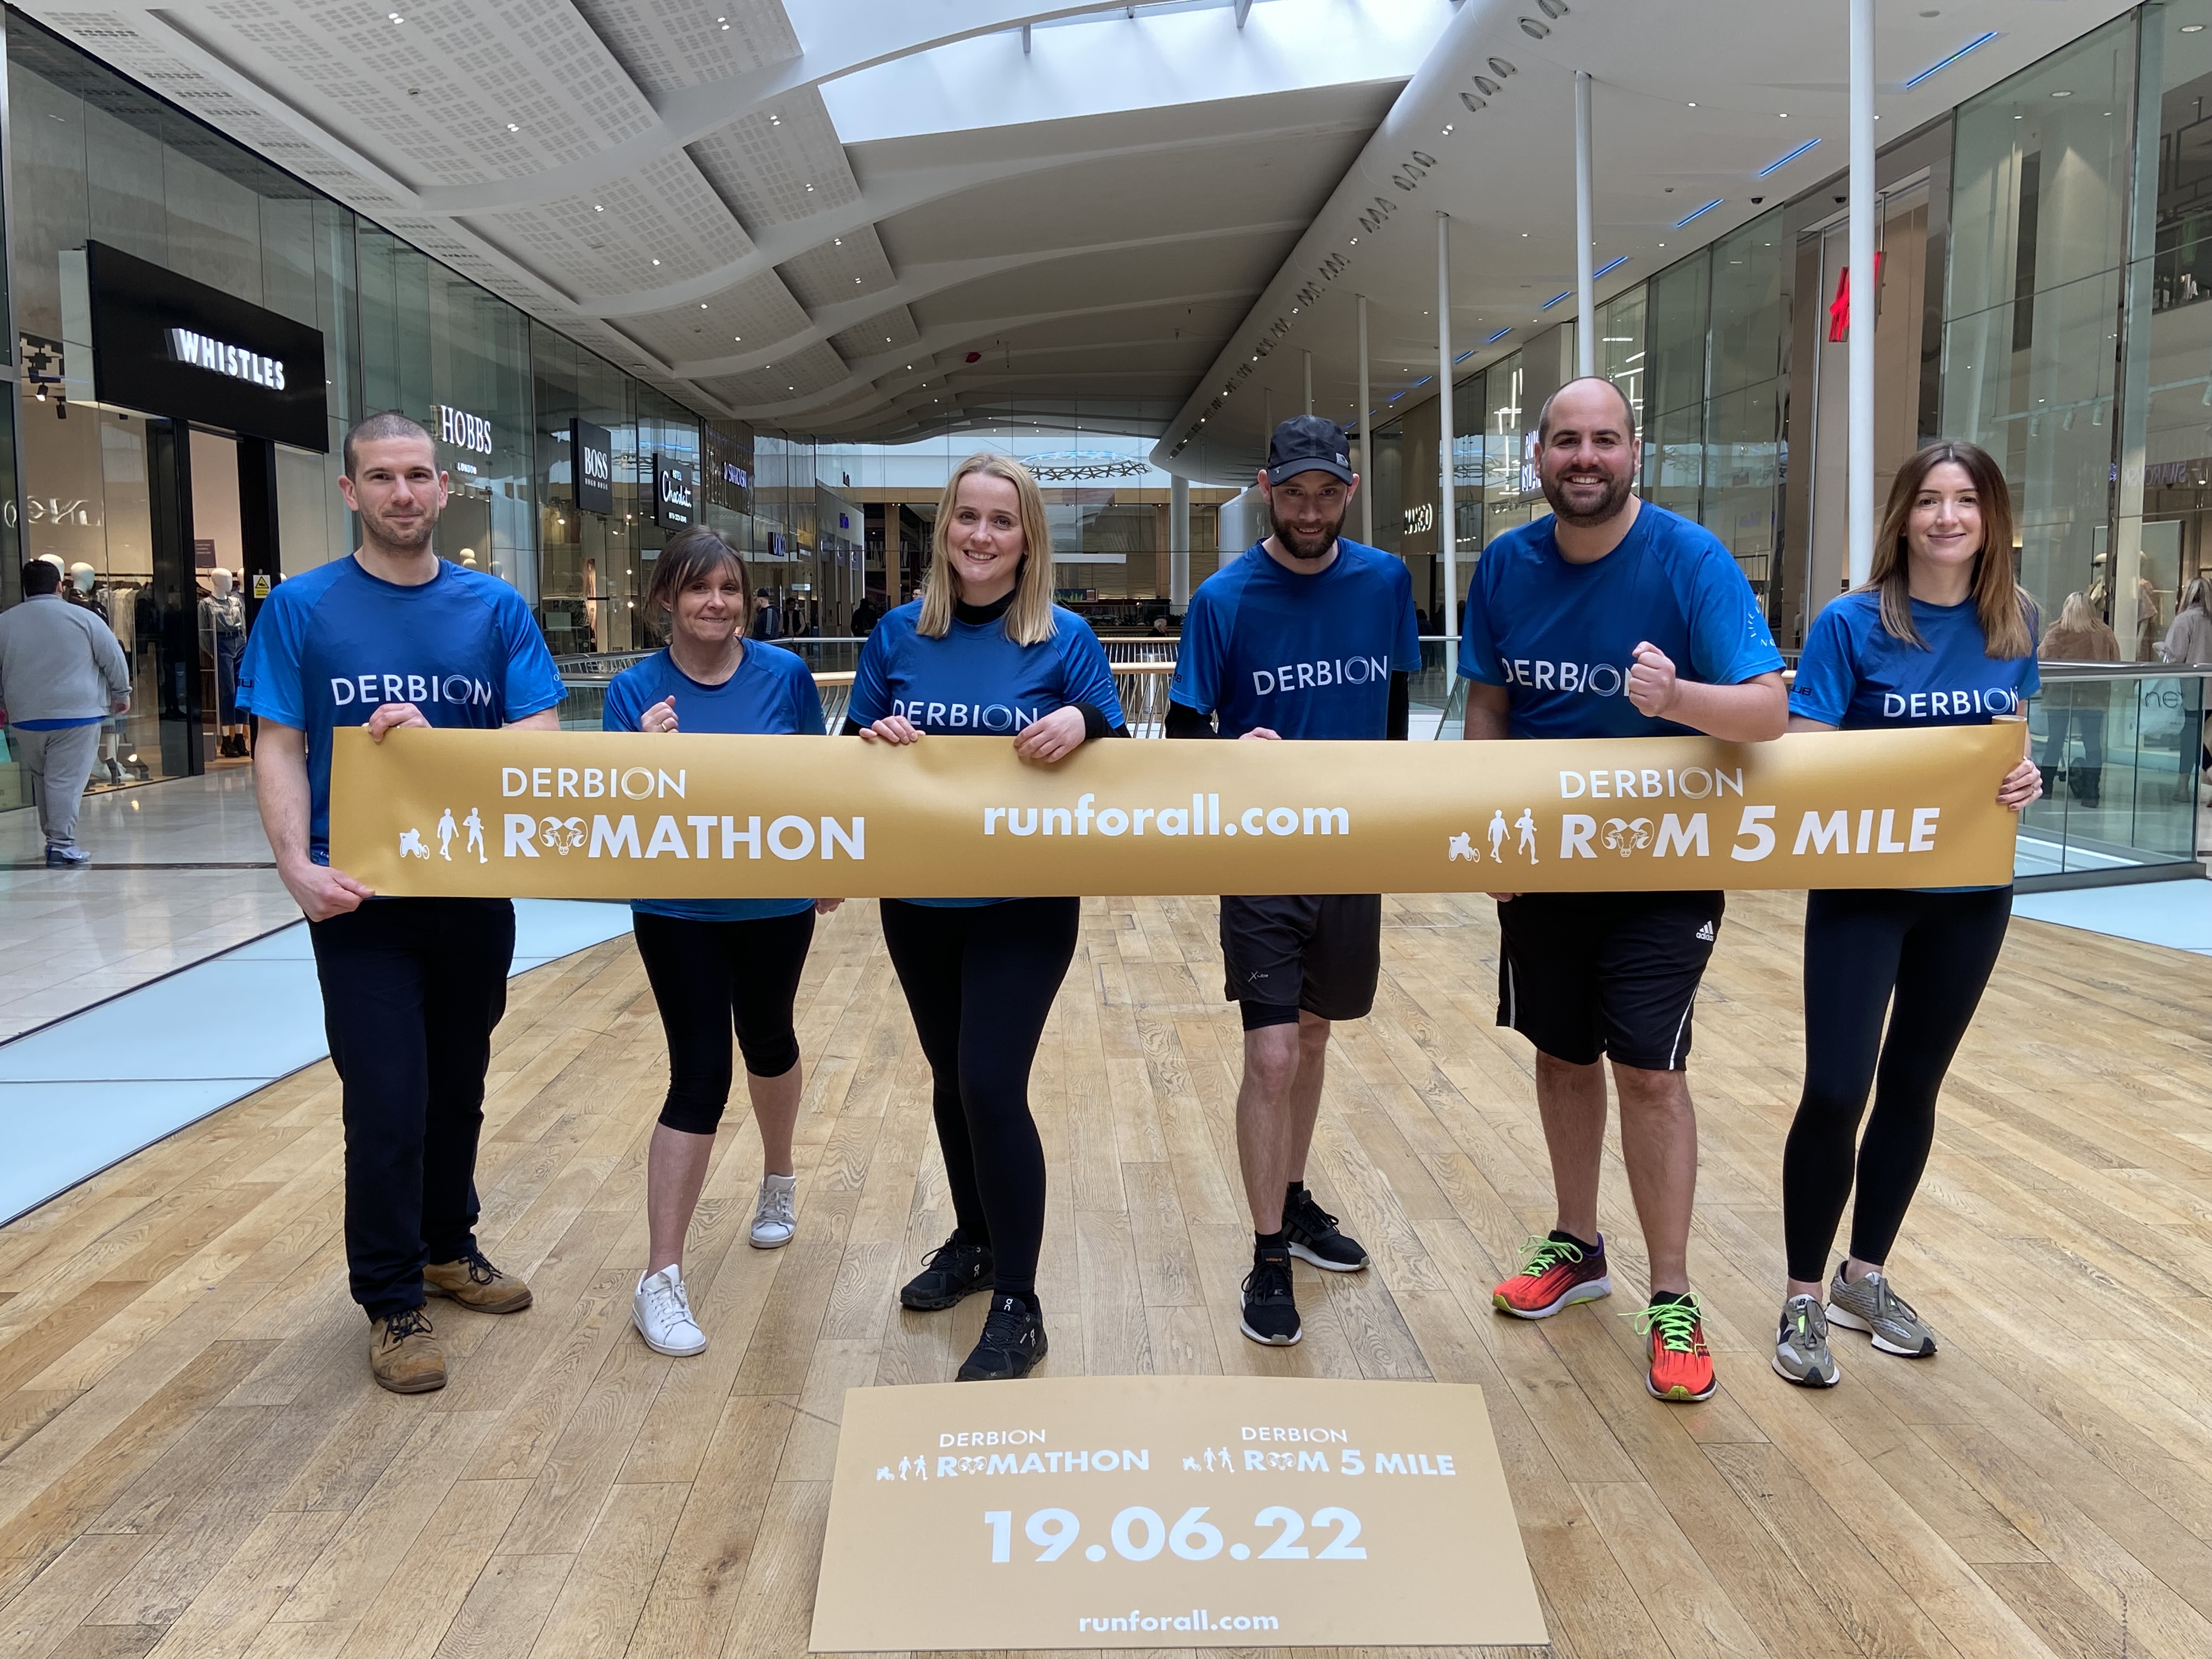 Ramathon is back for 2022 with a brand-new title sponsor